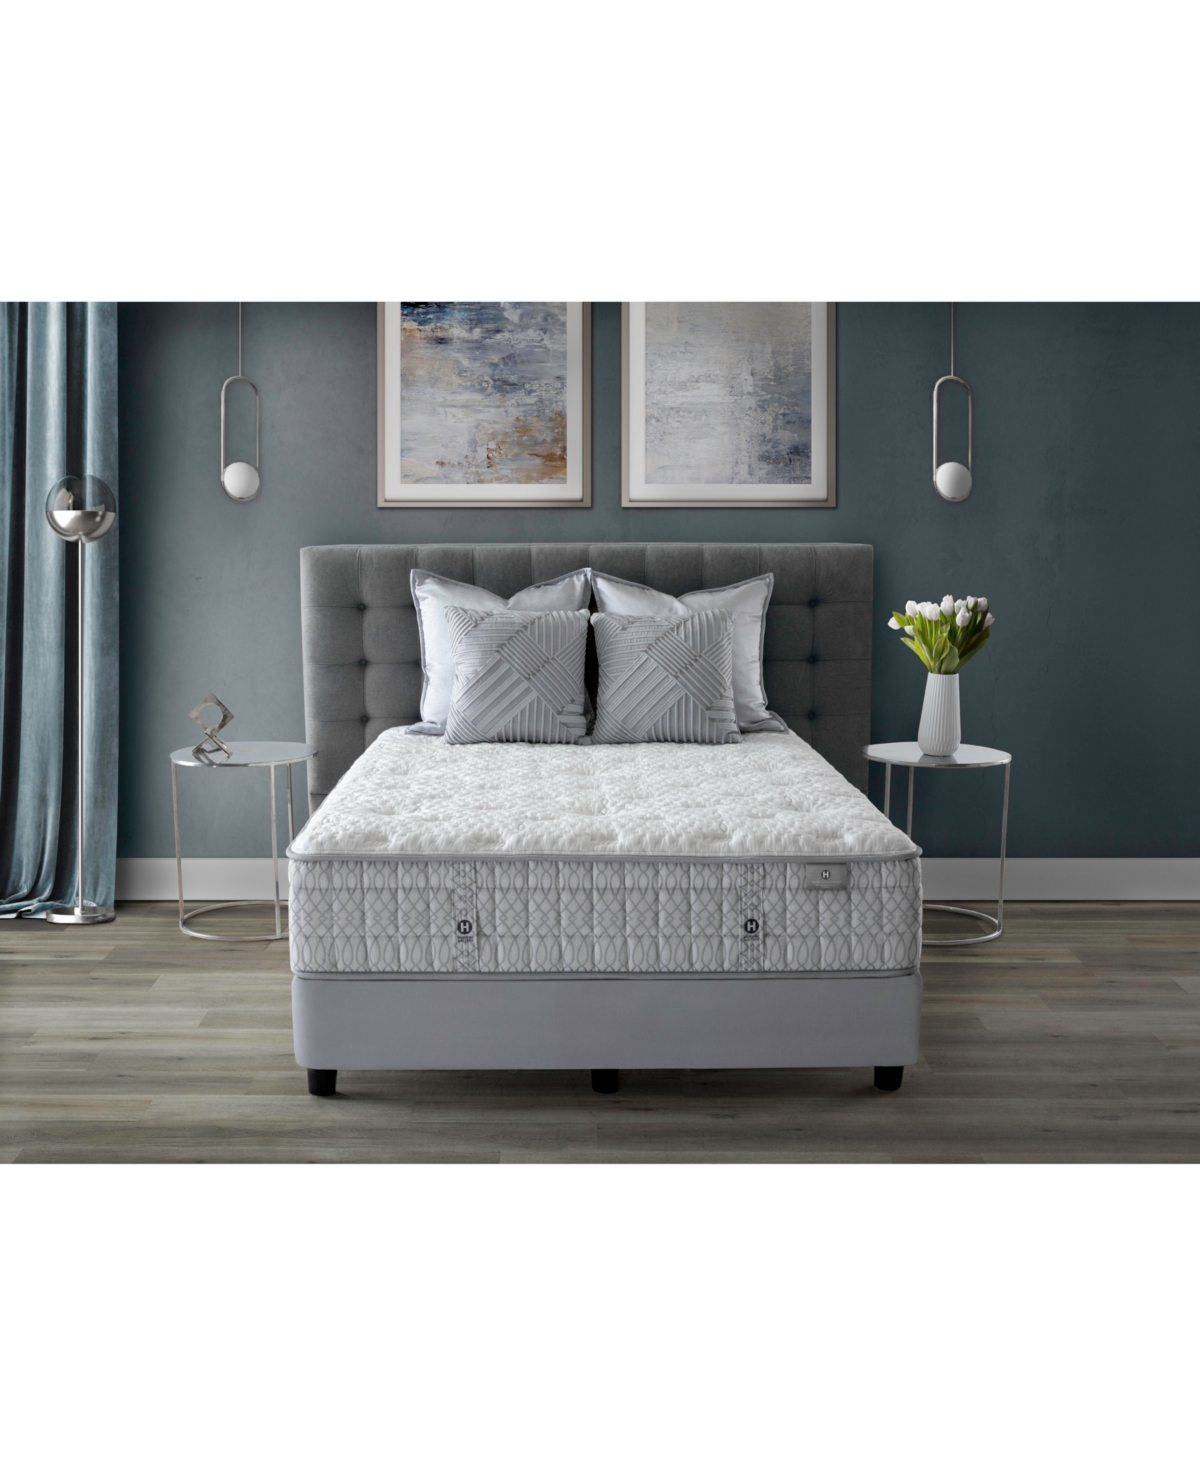 Hotel Collection By Aireloom Coppertech Silver 12.5" Firm Mattress- California King, Created For Macy's